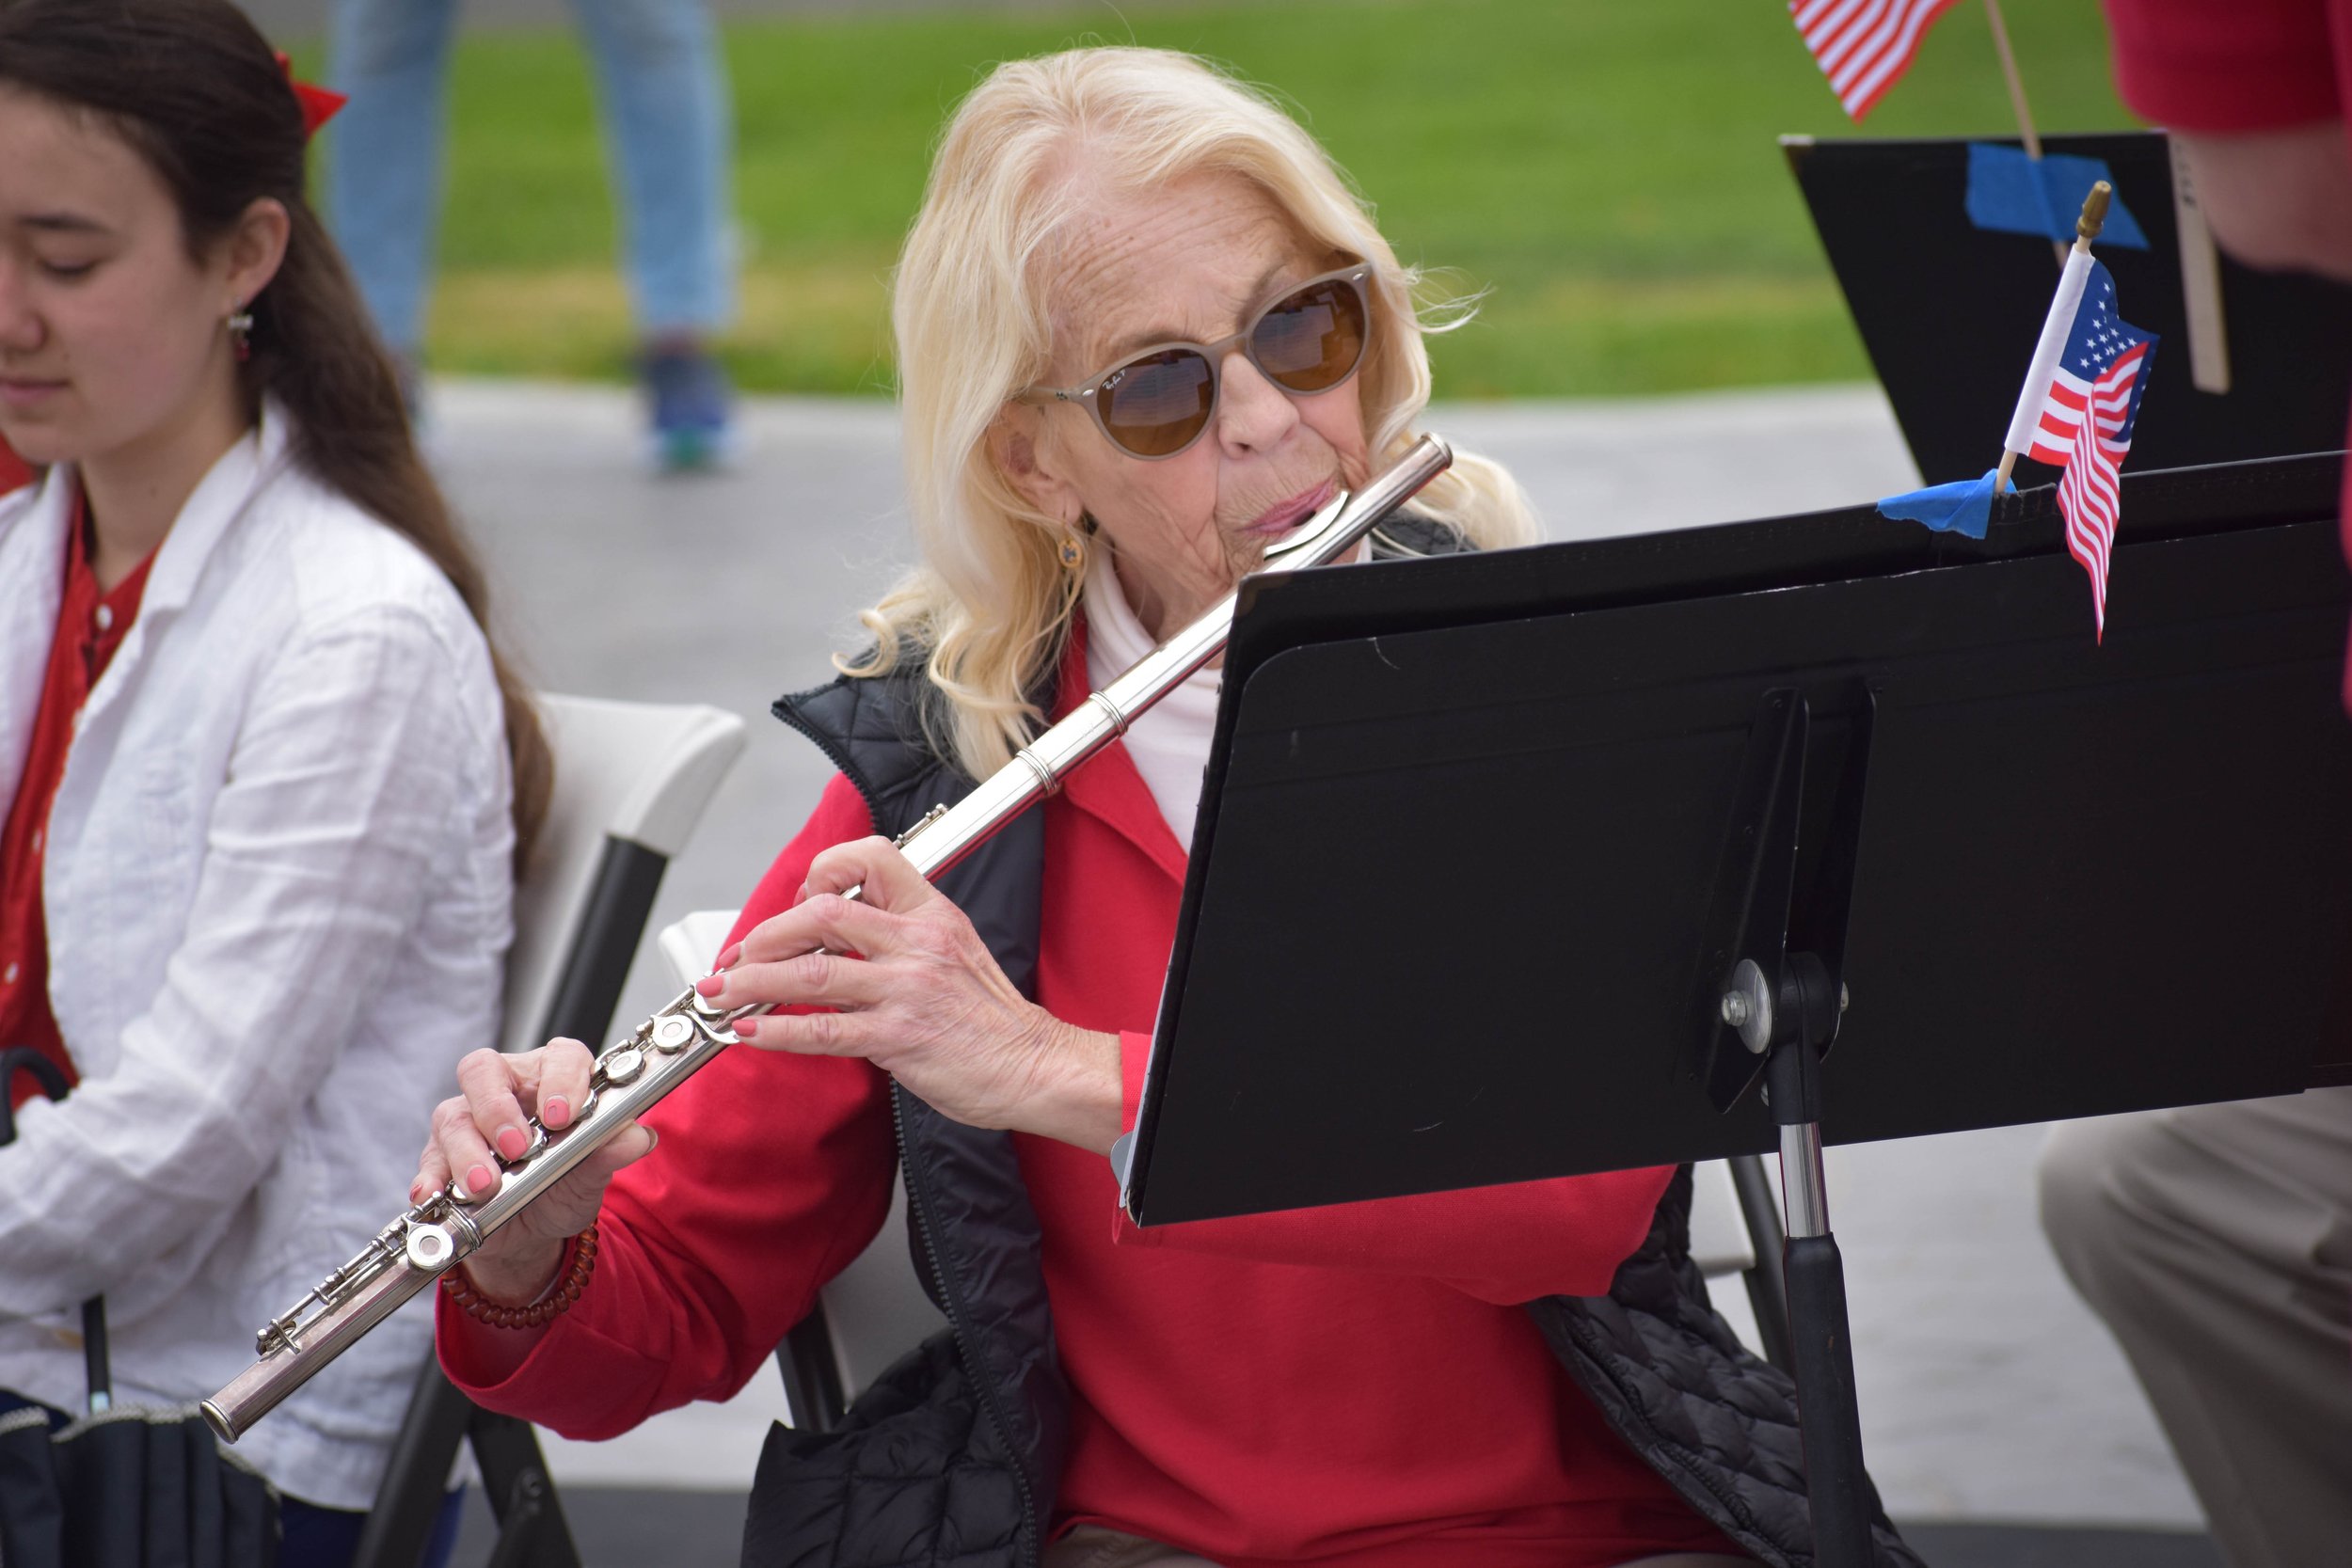 05-29-2023 LCCB and Jazz Band Memorial Day Concerts by Peyton Webster7-49.jpg